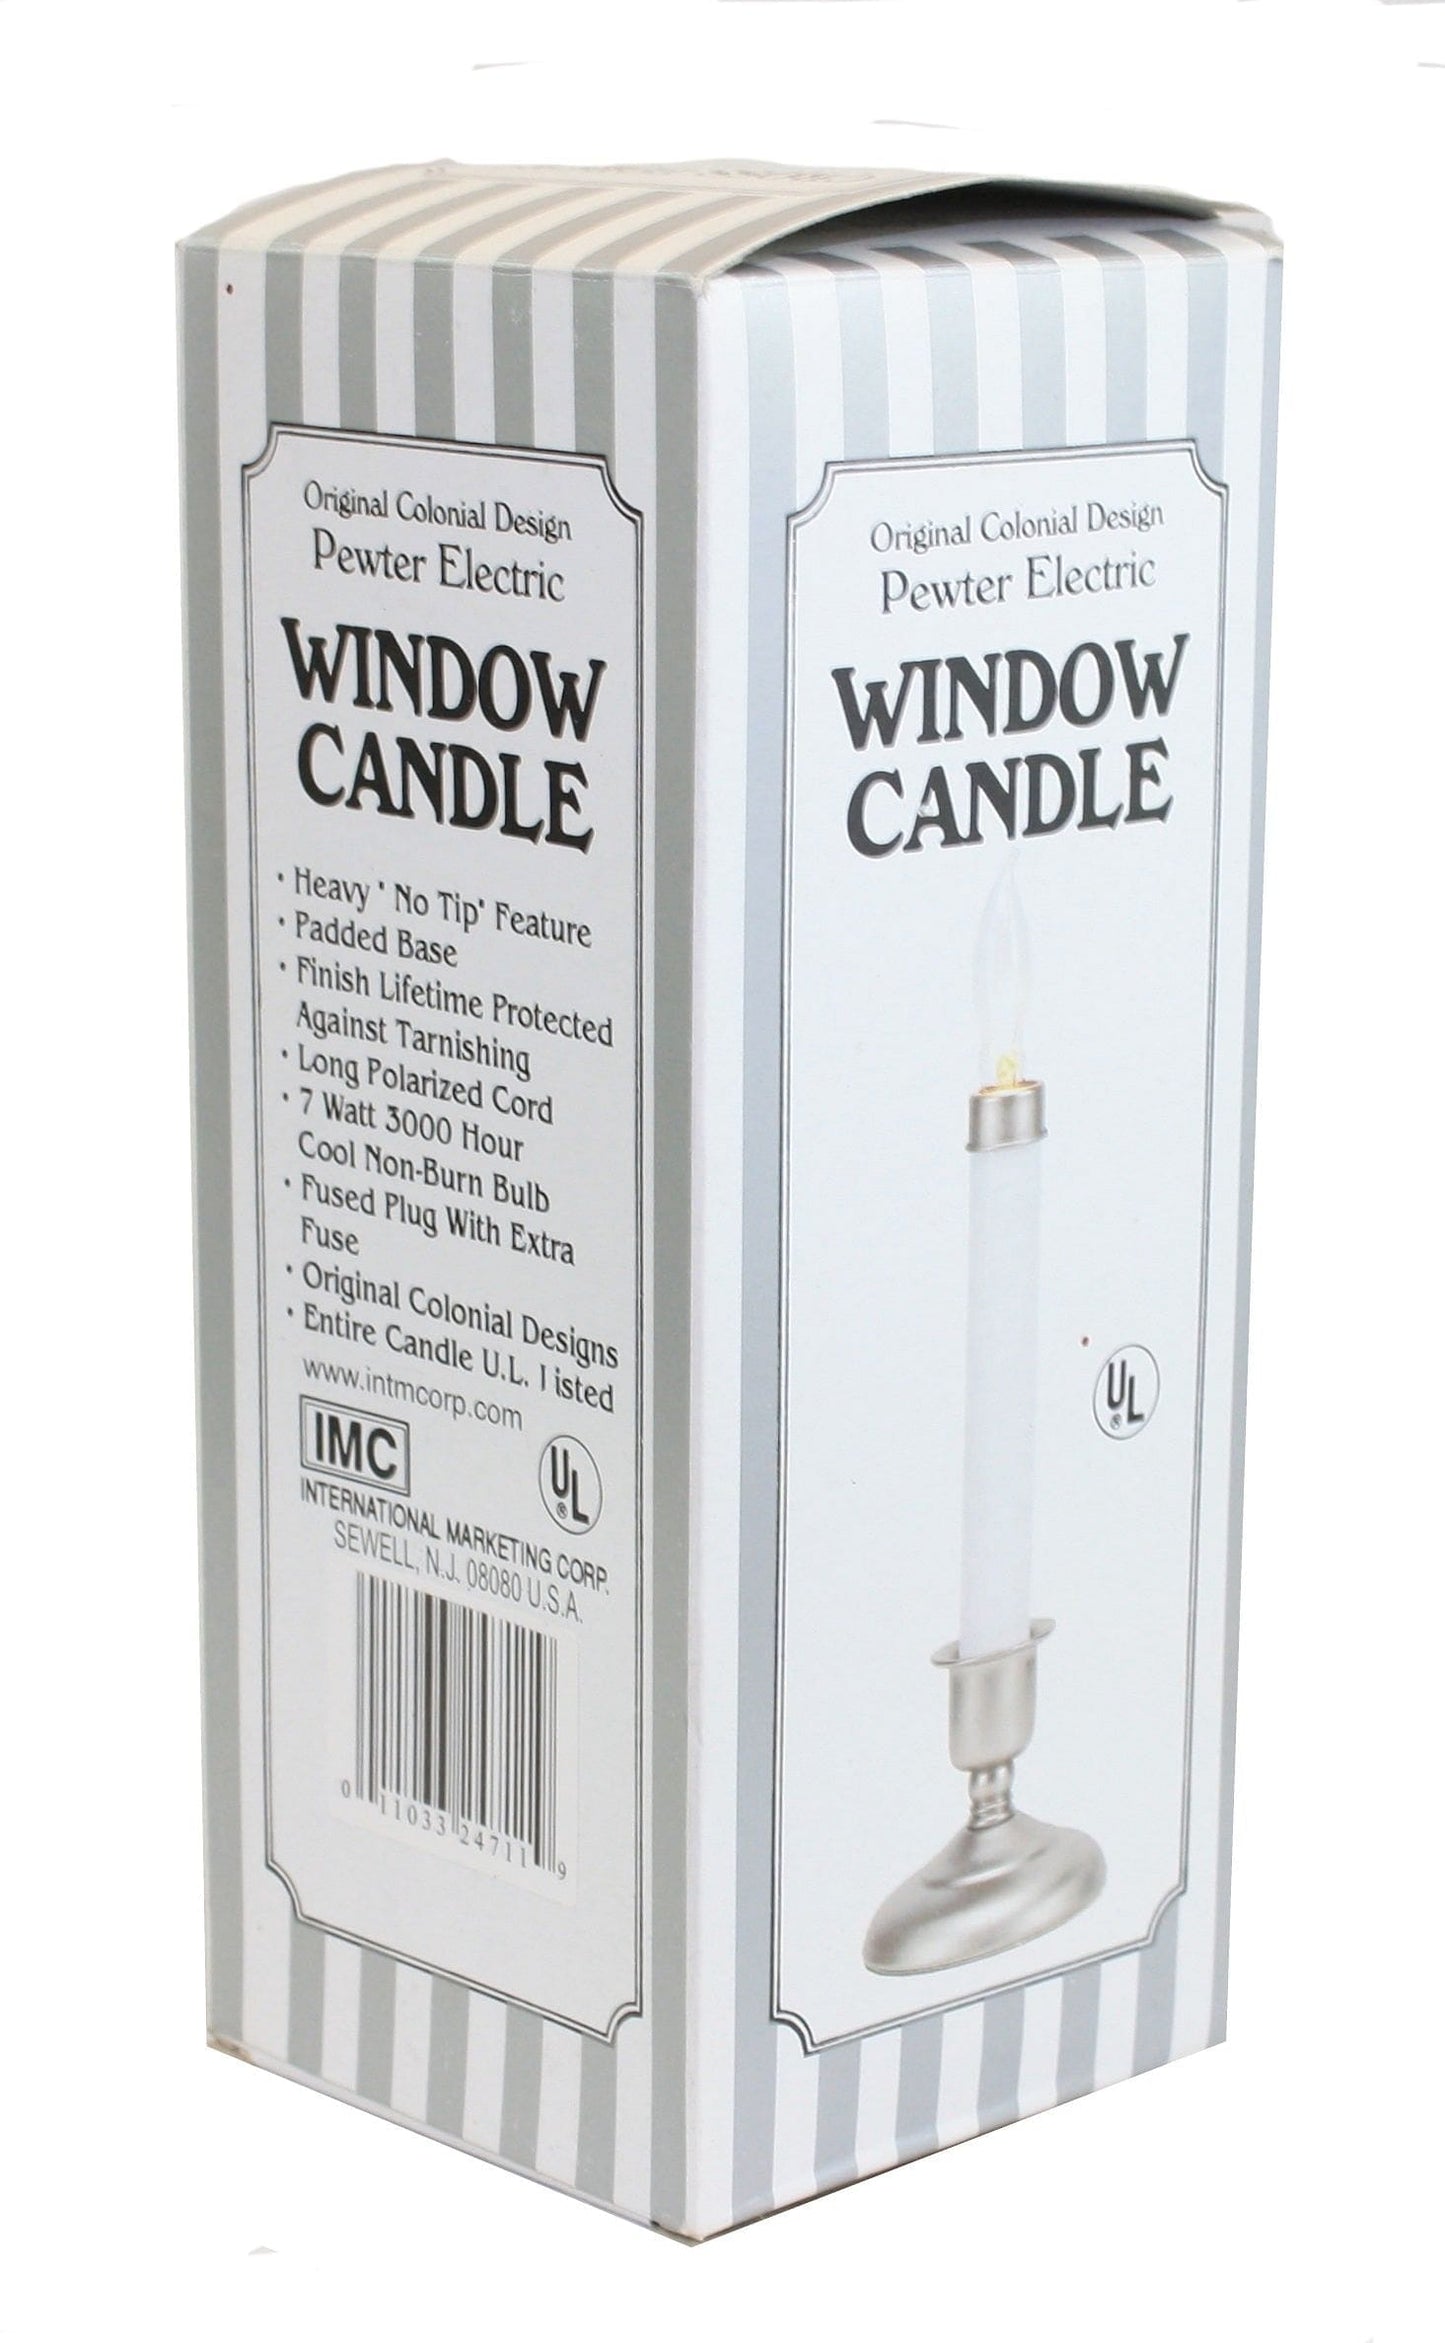 Cape Cod - Pewter Electric Sensor 9 Inch Window Candle - Shelburne Country Store